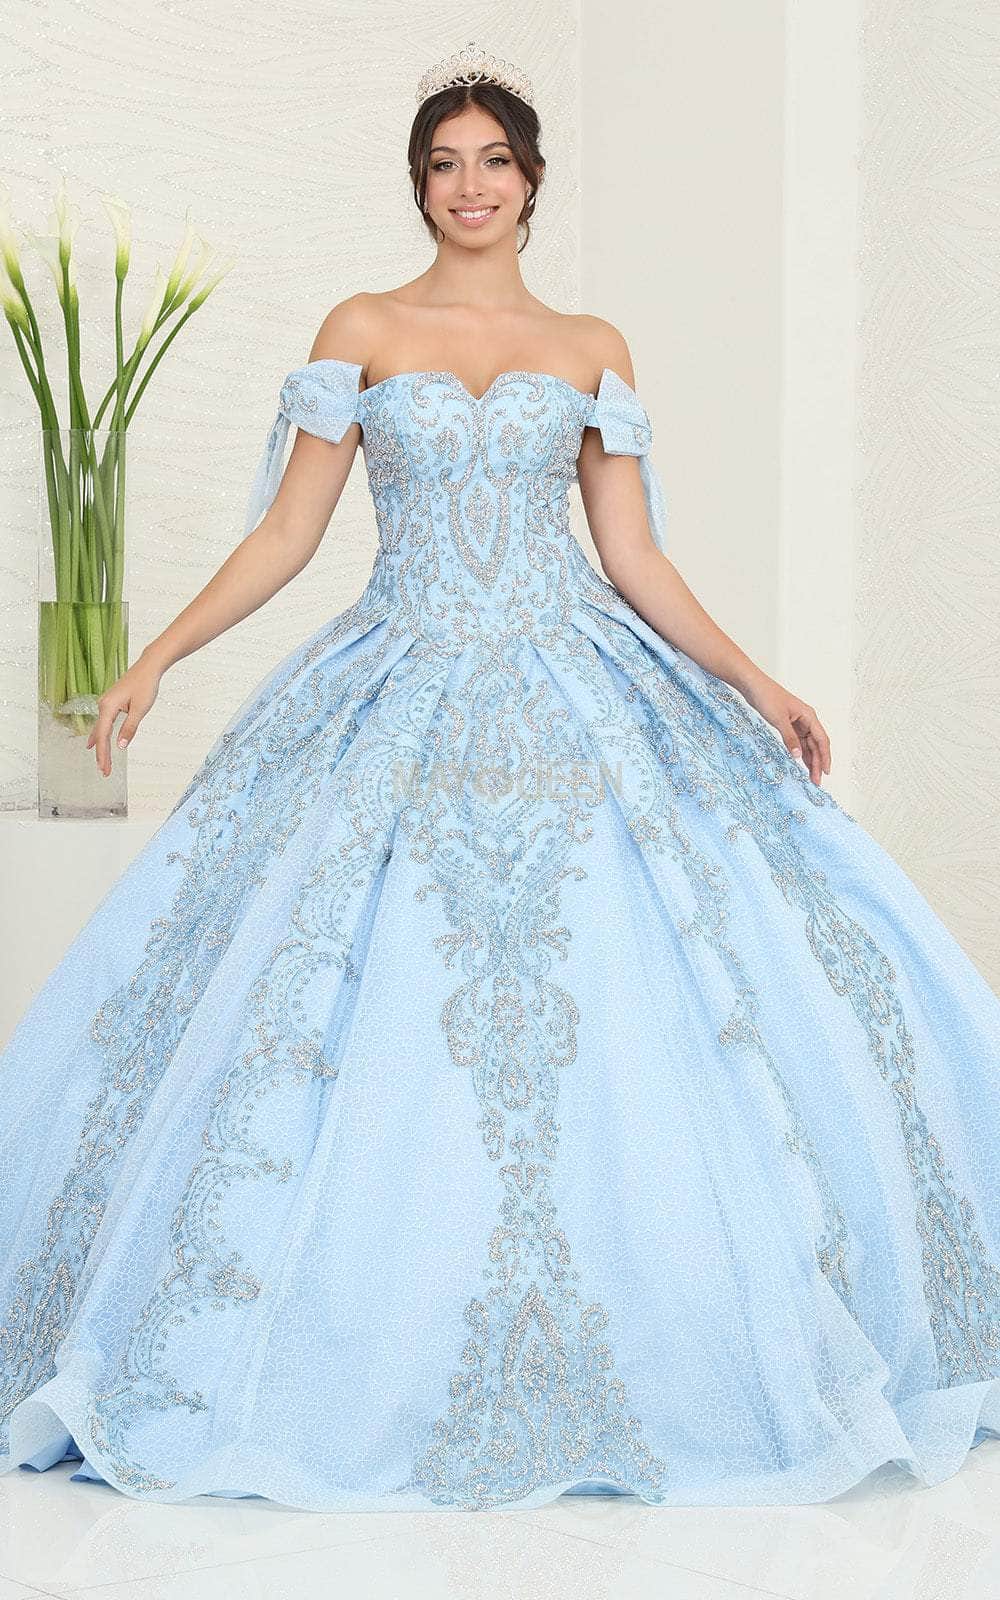 Image of May Queen LK241 - Bow Strap Ballgown